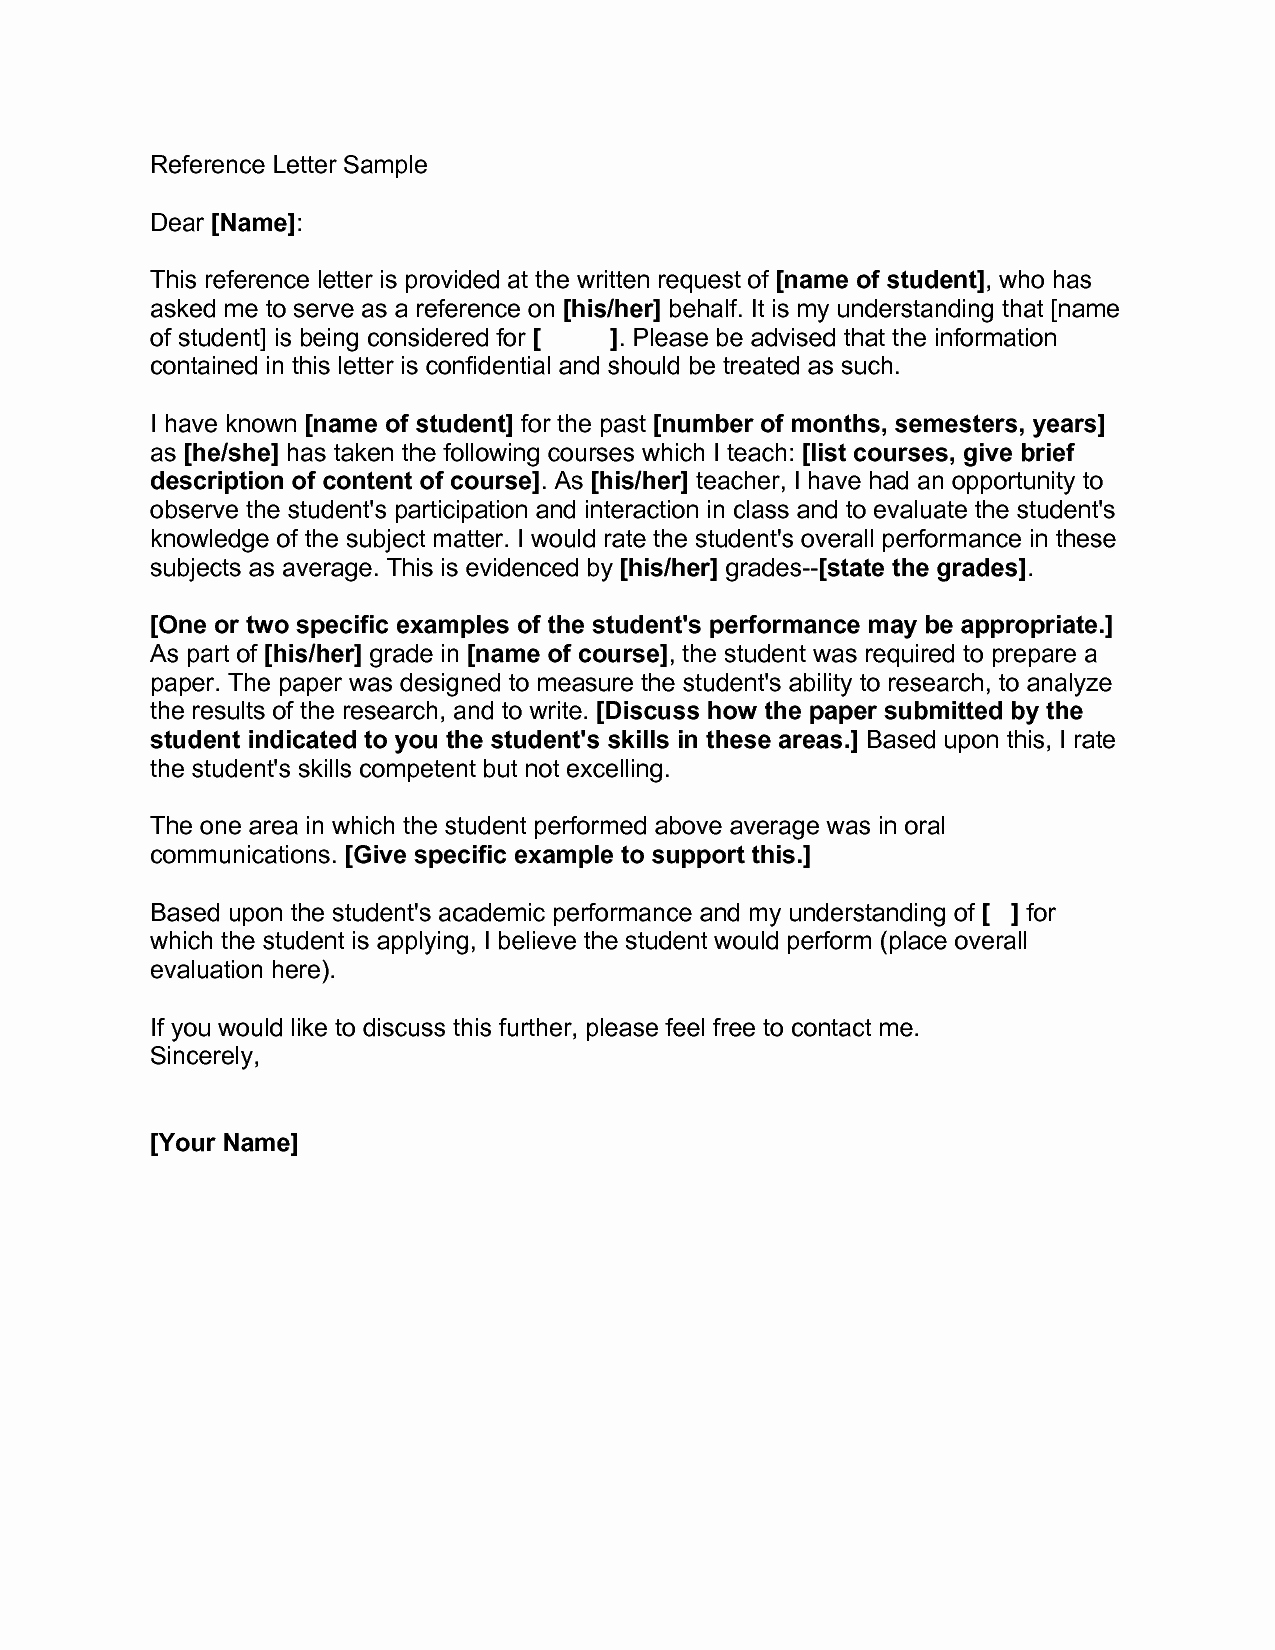 Request Letter Of Recommendation Sample Beautiful Reference Letter Samplesexamples Of Reference Letters